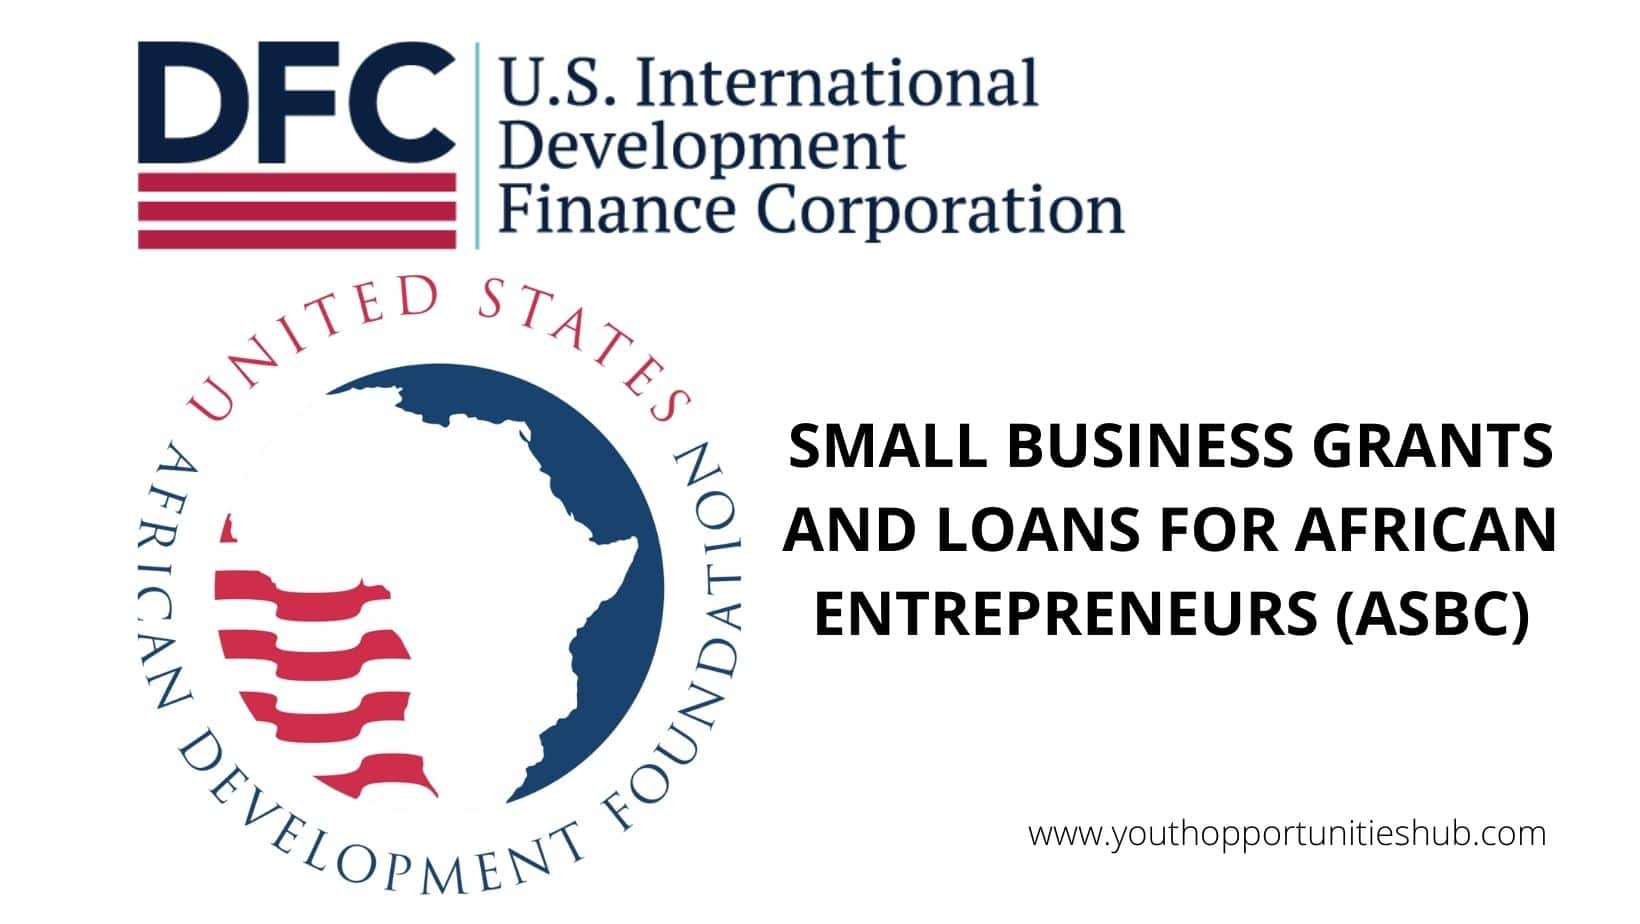 THE UNITED STATES AFRICAN DEVELOPMENT FOUNDATION (USADF) SMALL BUSINESS